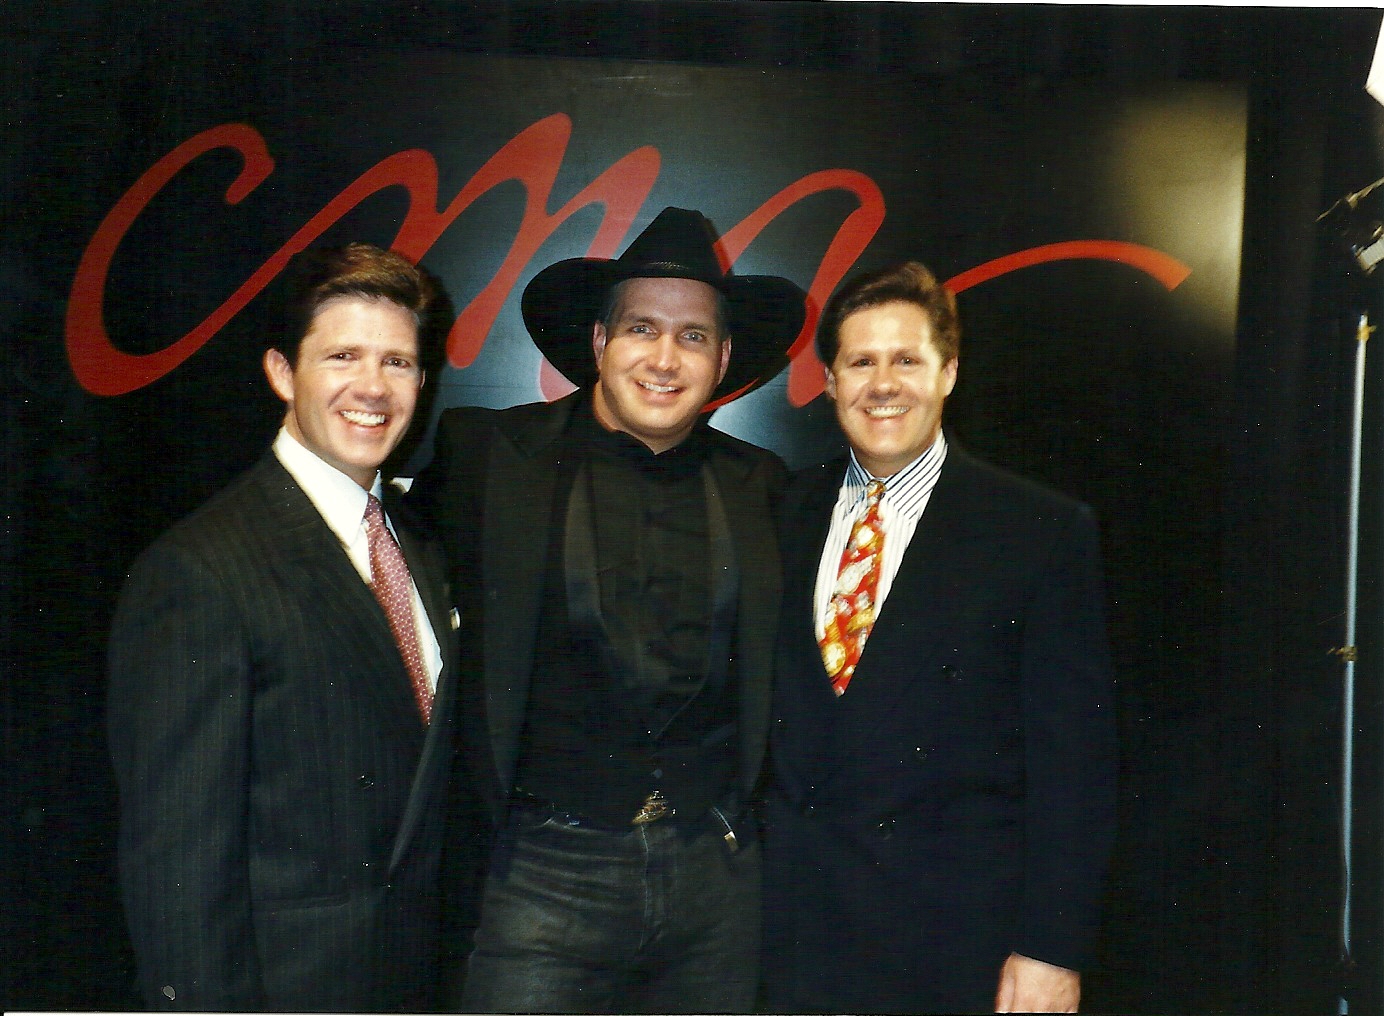 Garth Brooks, Butch McCain and Ben McCain after interview in Nashville for Good Morning Oklahoma.